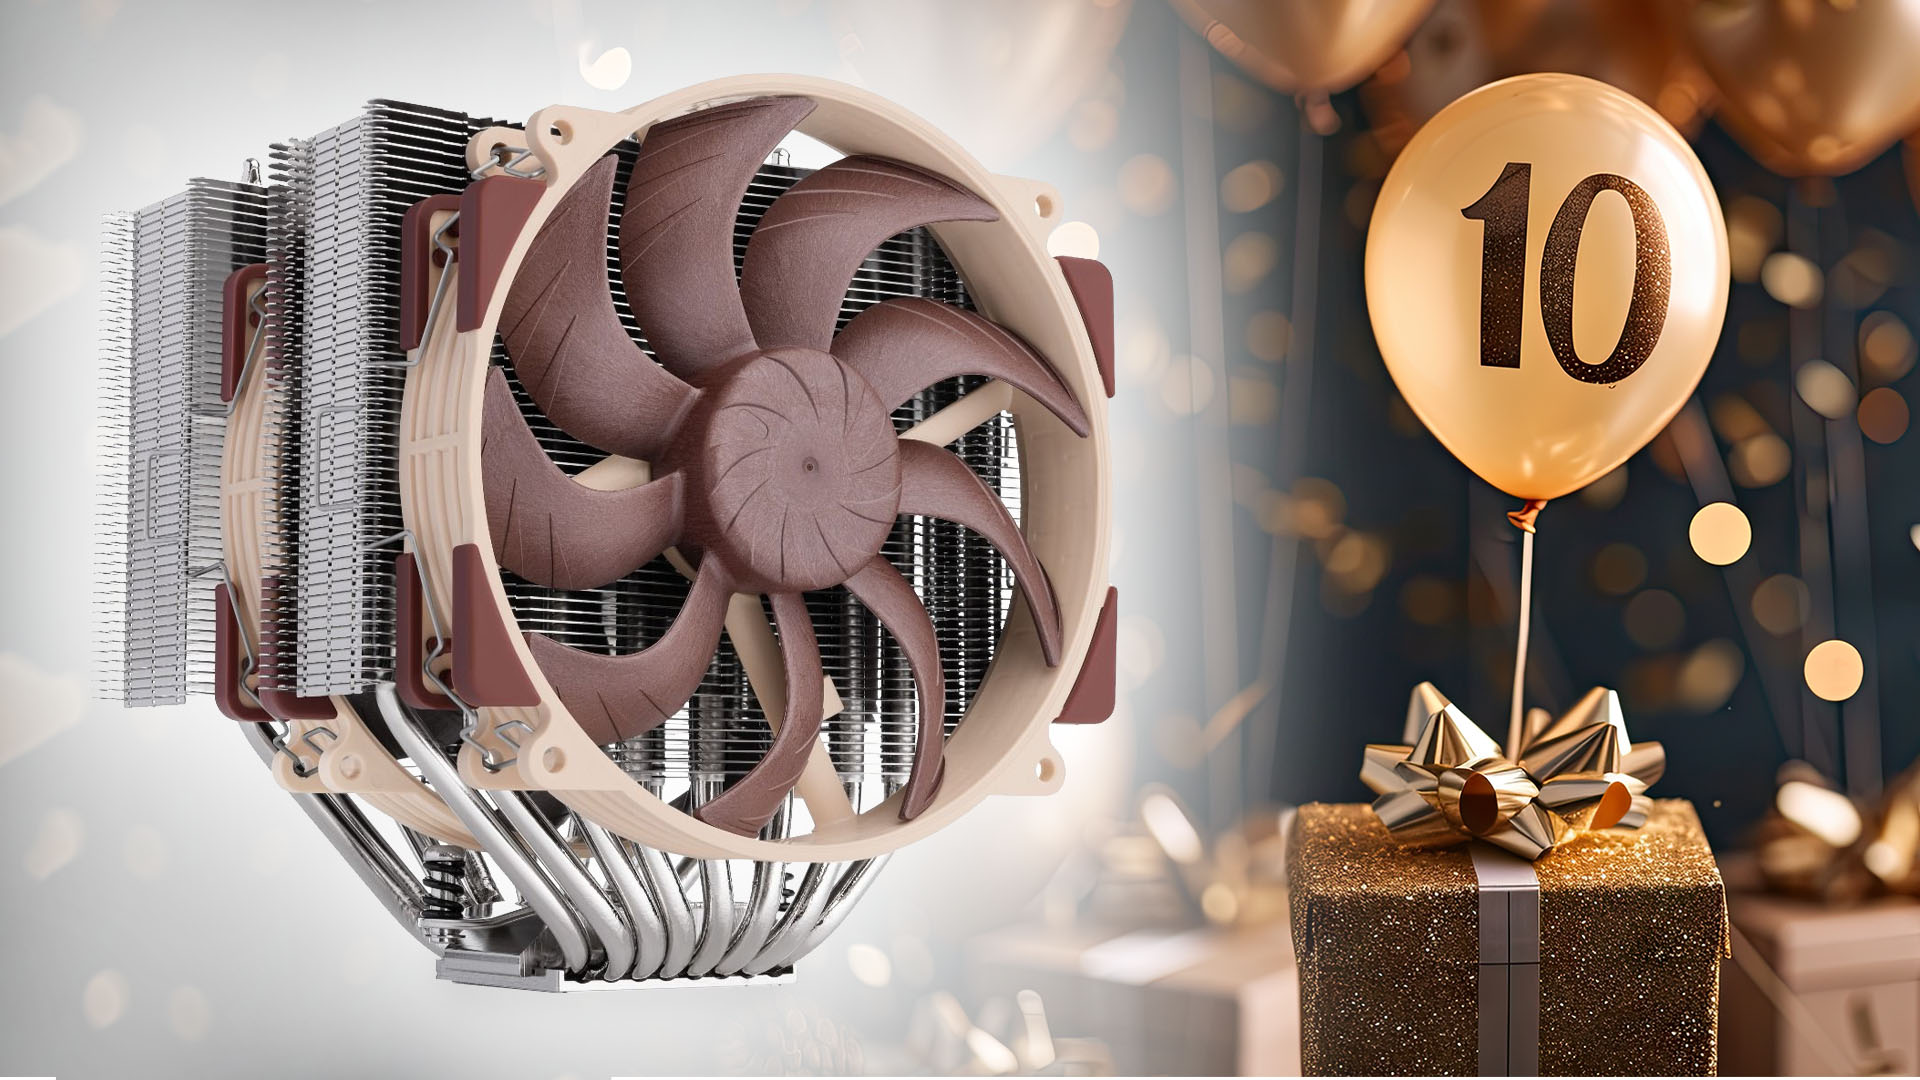 It has taken Noctua ten years to improve on its iconic CPU cooler